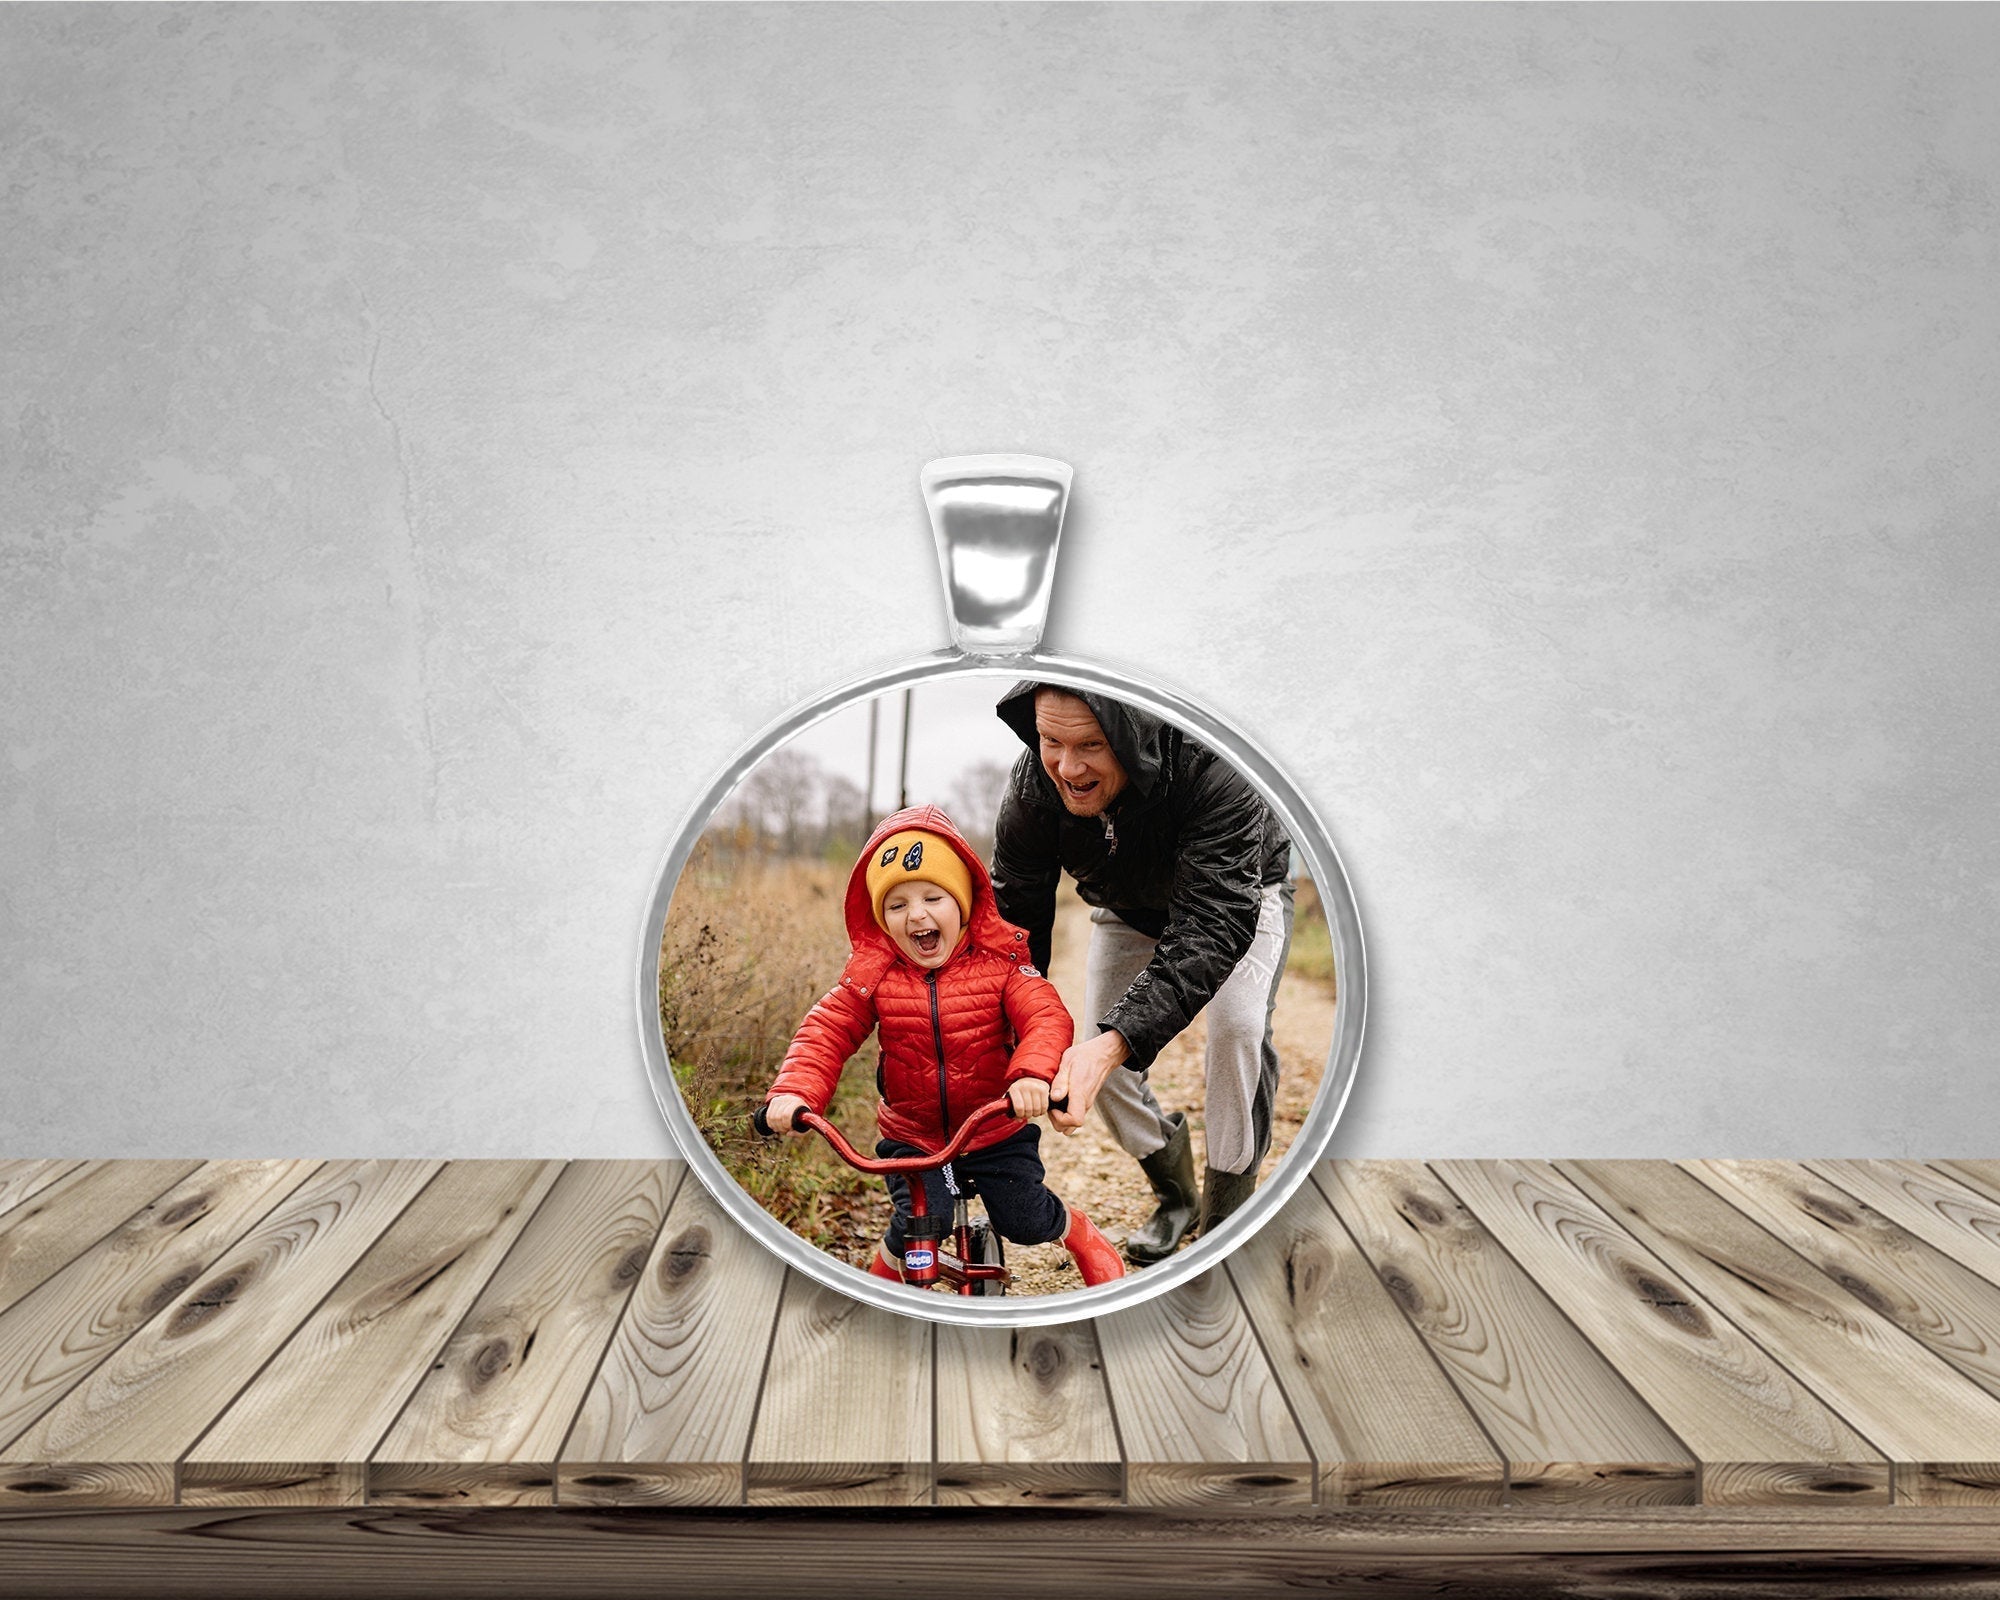 Custom Round Photo Pendant - Personalized Round Photo Charm - Custom Silver Pendant - Personalized Photo Charm - Add Your Own Photo or Text